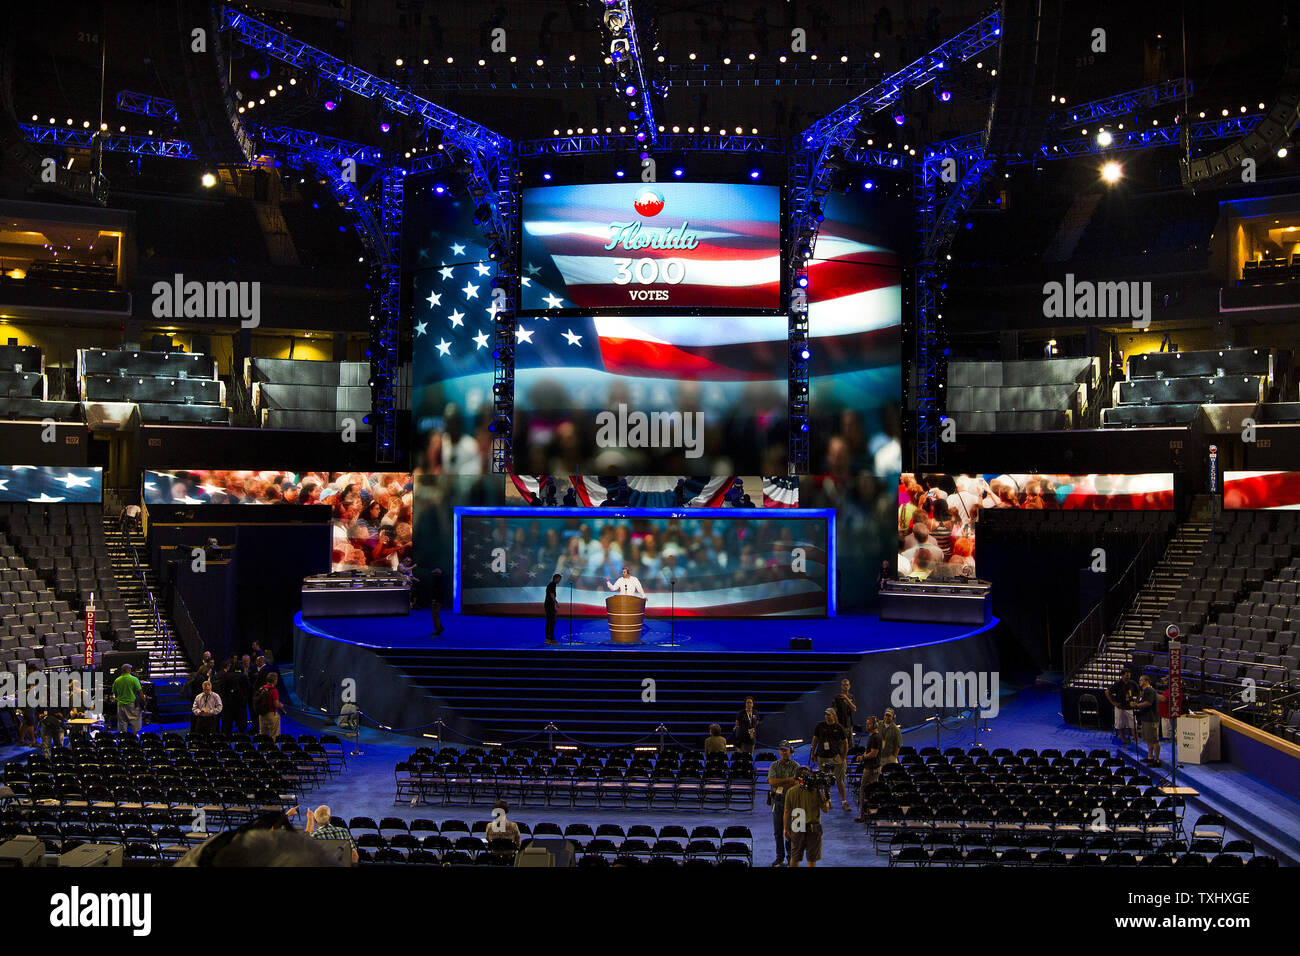 Final testing continues for the podium and teleprompters at the 2012 Democratic National Convention site inside the Time Warner Cable Arena in Charlotte, North Carolina on September 2, 2012.     UPI/Gary C. Caskey Stock Photo